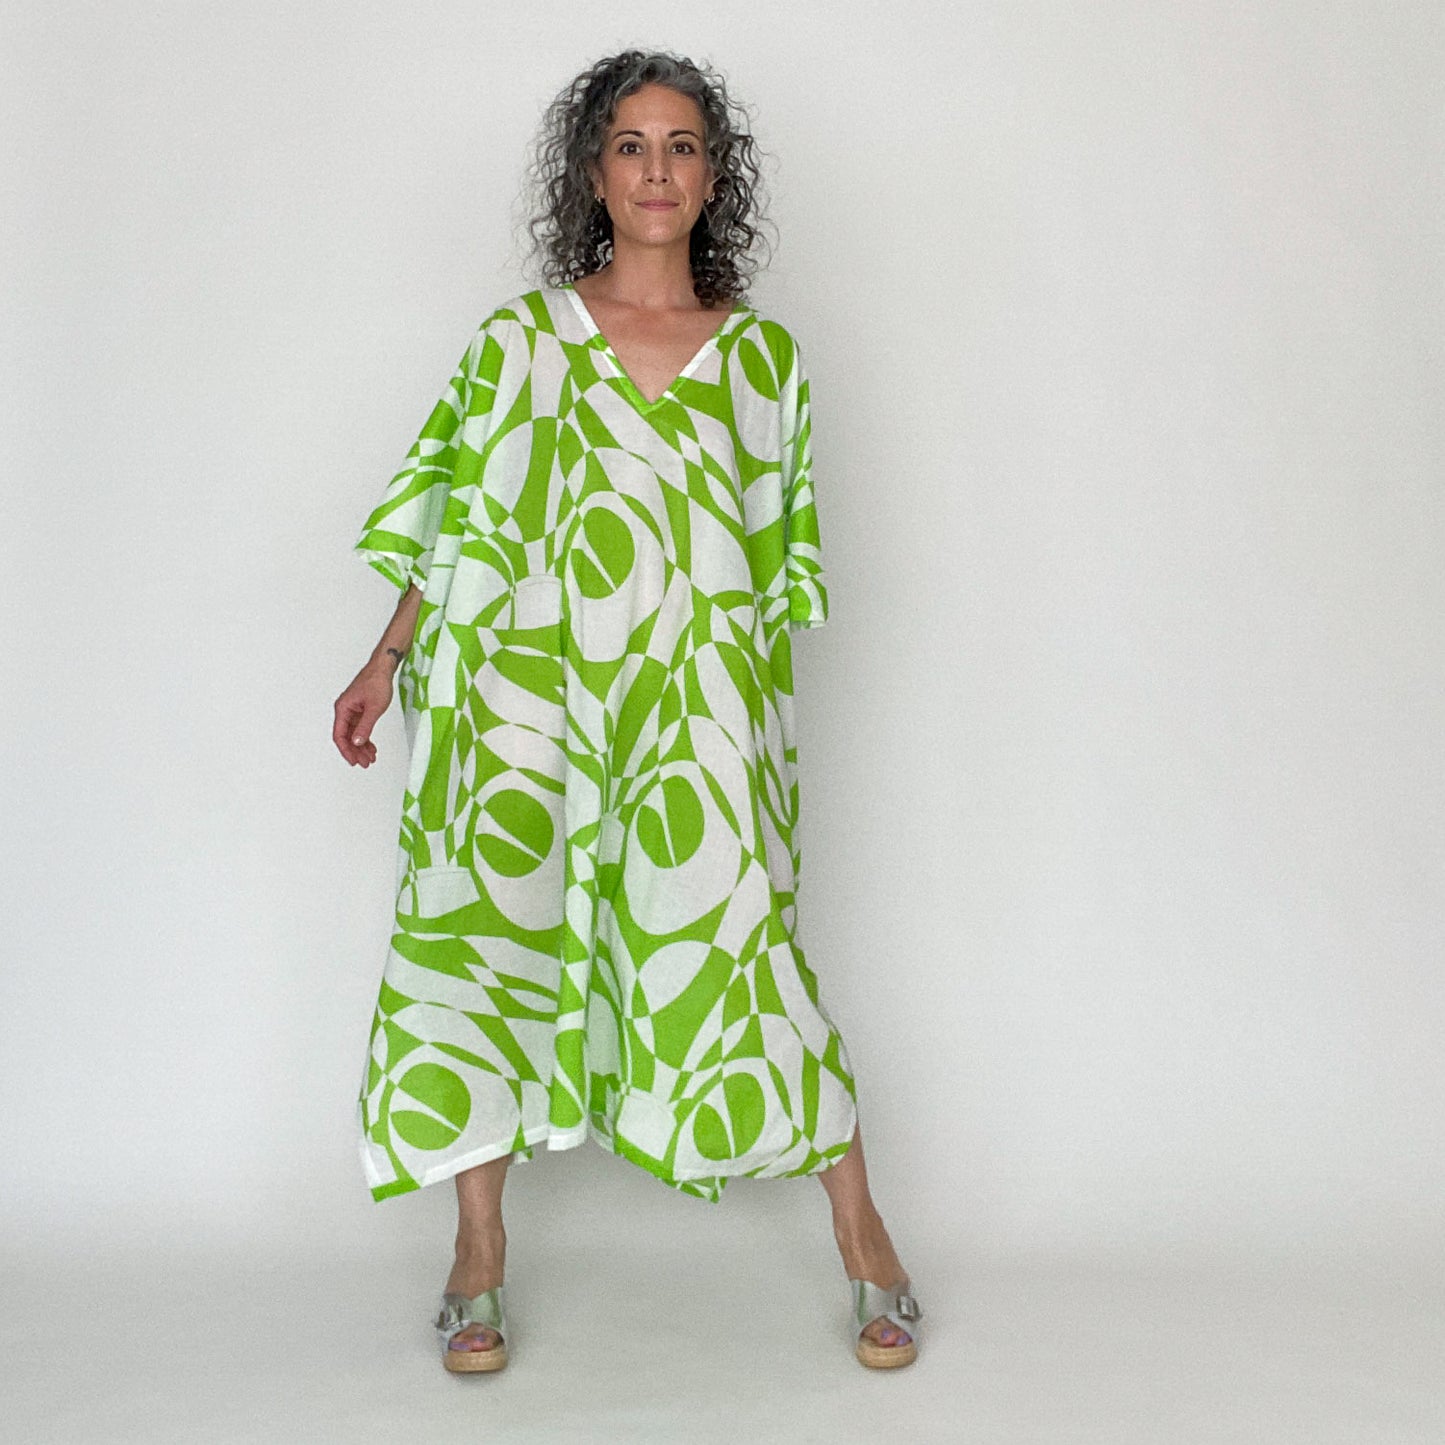 House of Lu Mae Caftan in Color Number 42 is a geometric print in a bright lime green and white. The fabric is a lightweight cotton lawn with a crisp drape. This caftan is absolutely perfect for the beach or for those hot summer days. Like a personal AC unit, Mae is guaranteed to keep you cool when the temps go up. 